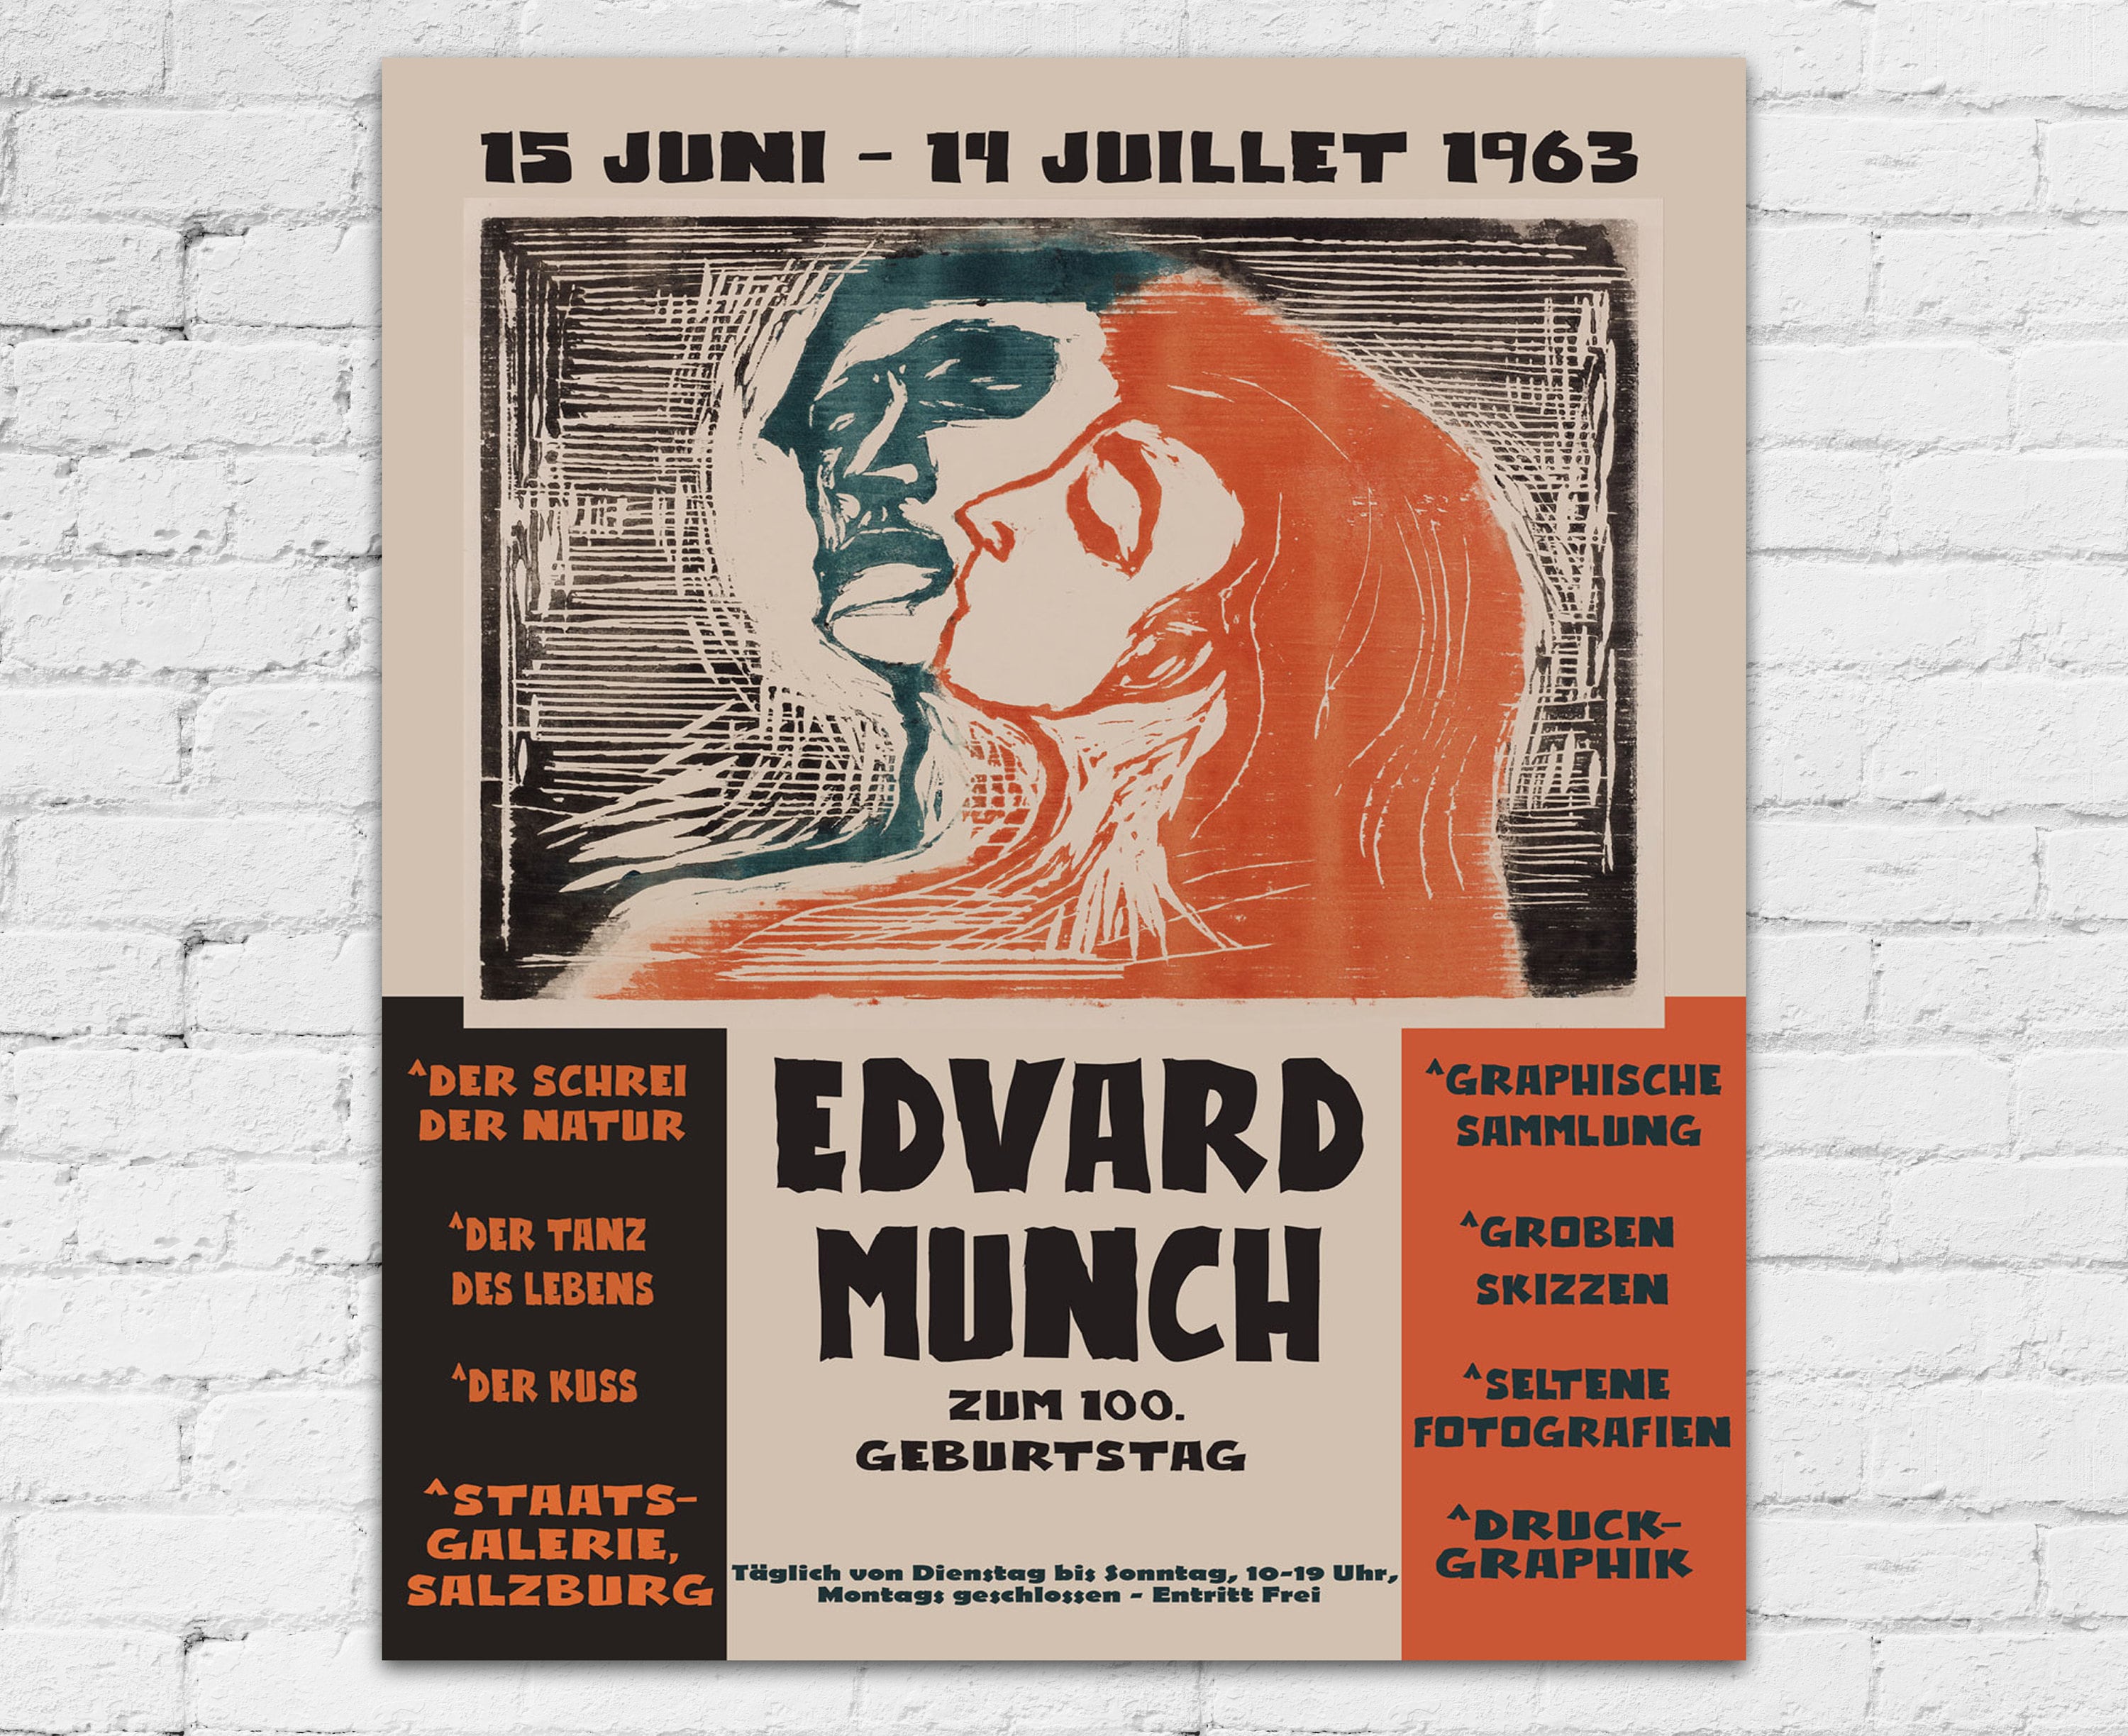 Edvard Munch Exhibition Poster 1963 Abstract Museum Poster Art